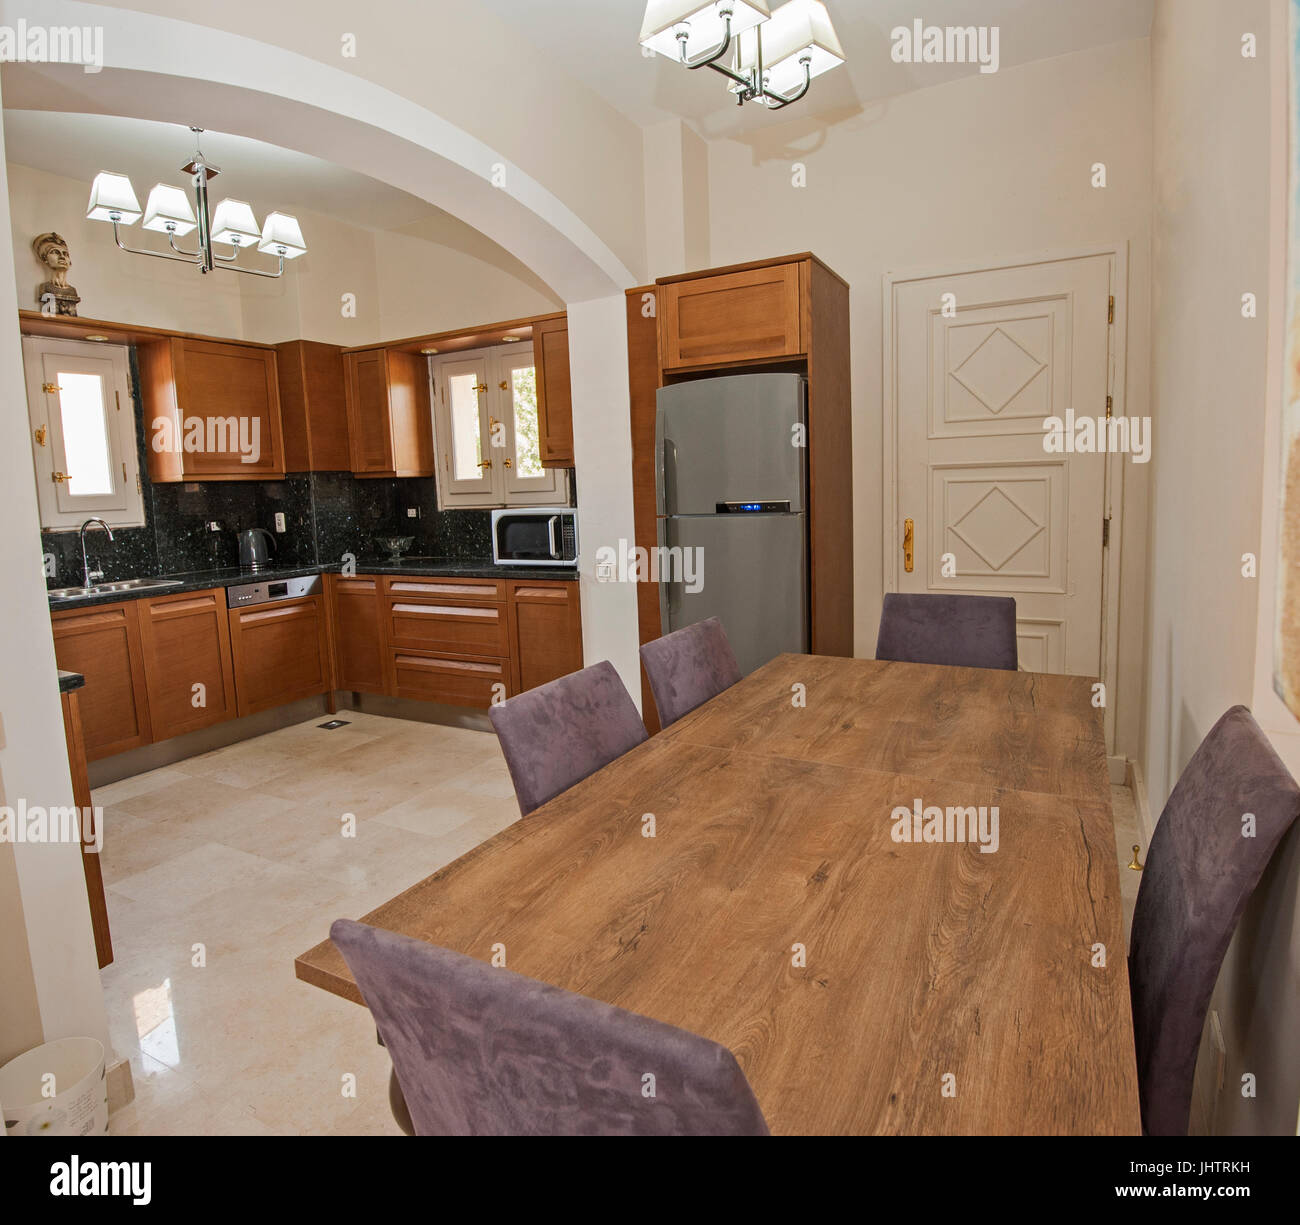 Kitchen and dining area in luxury apartment show home showing interior design decor furnishing Stock Photo